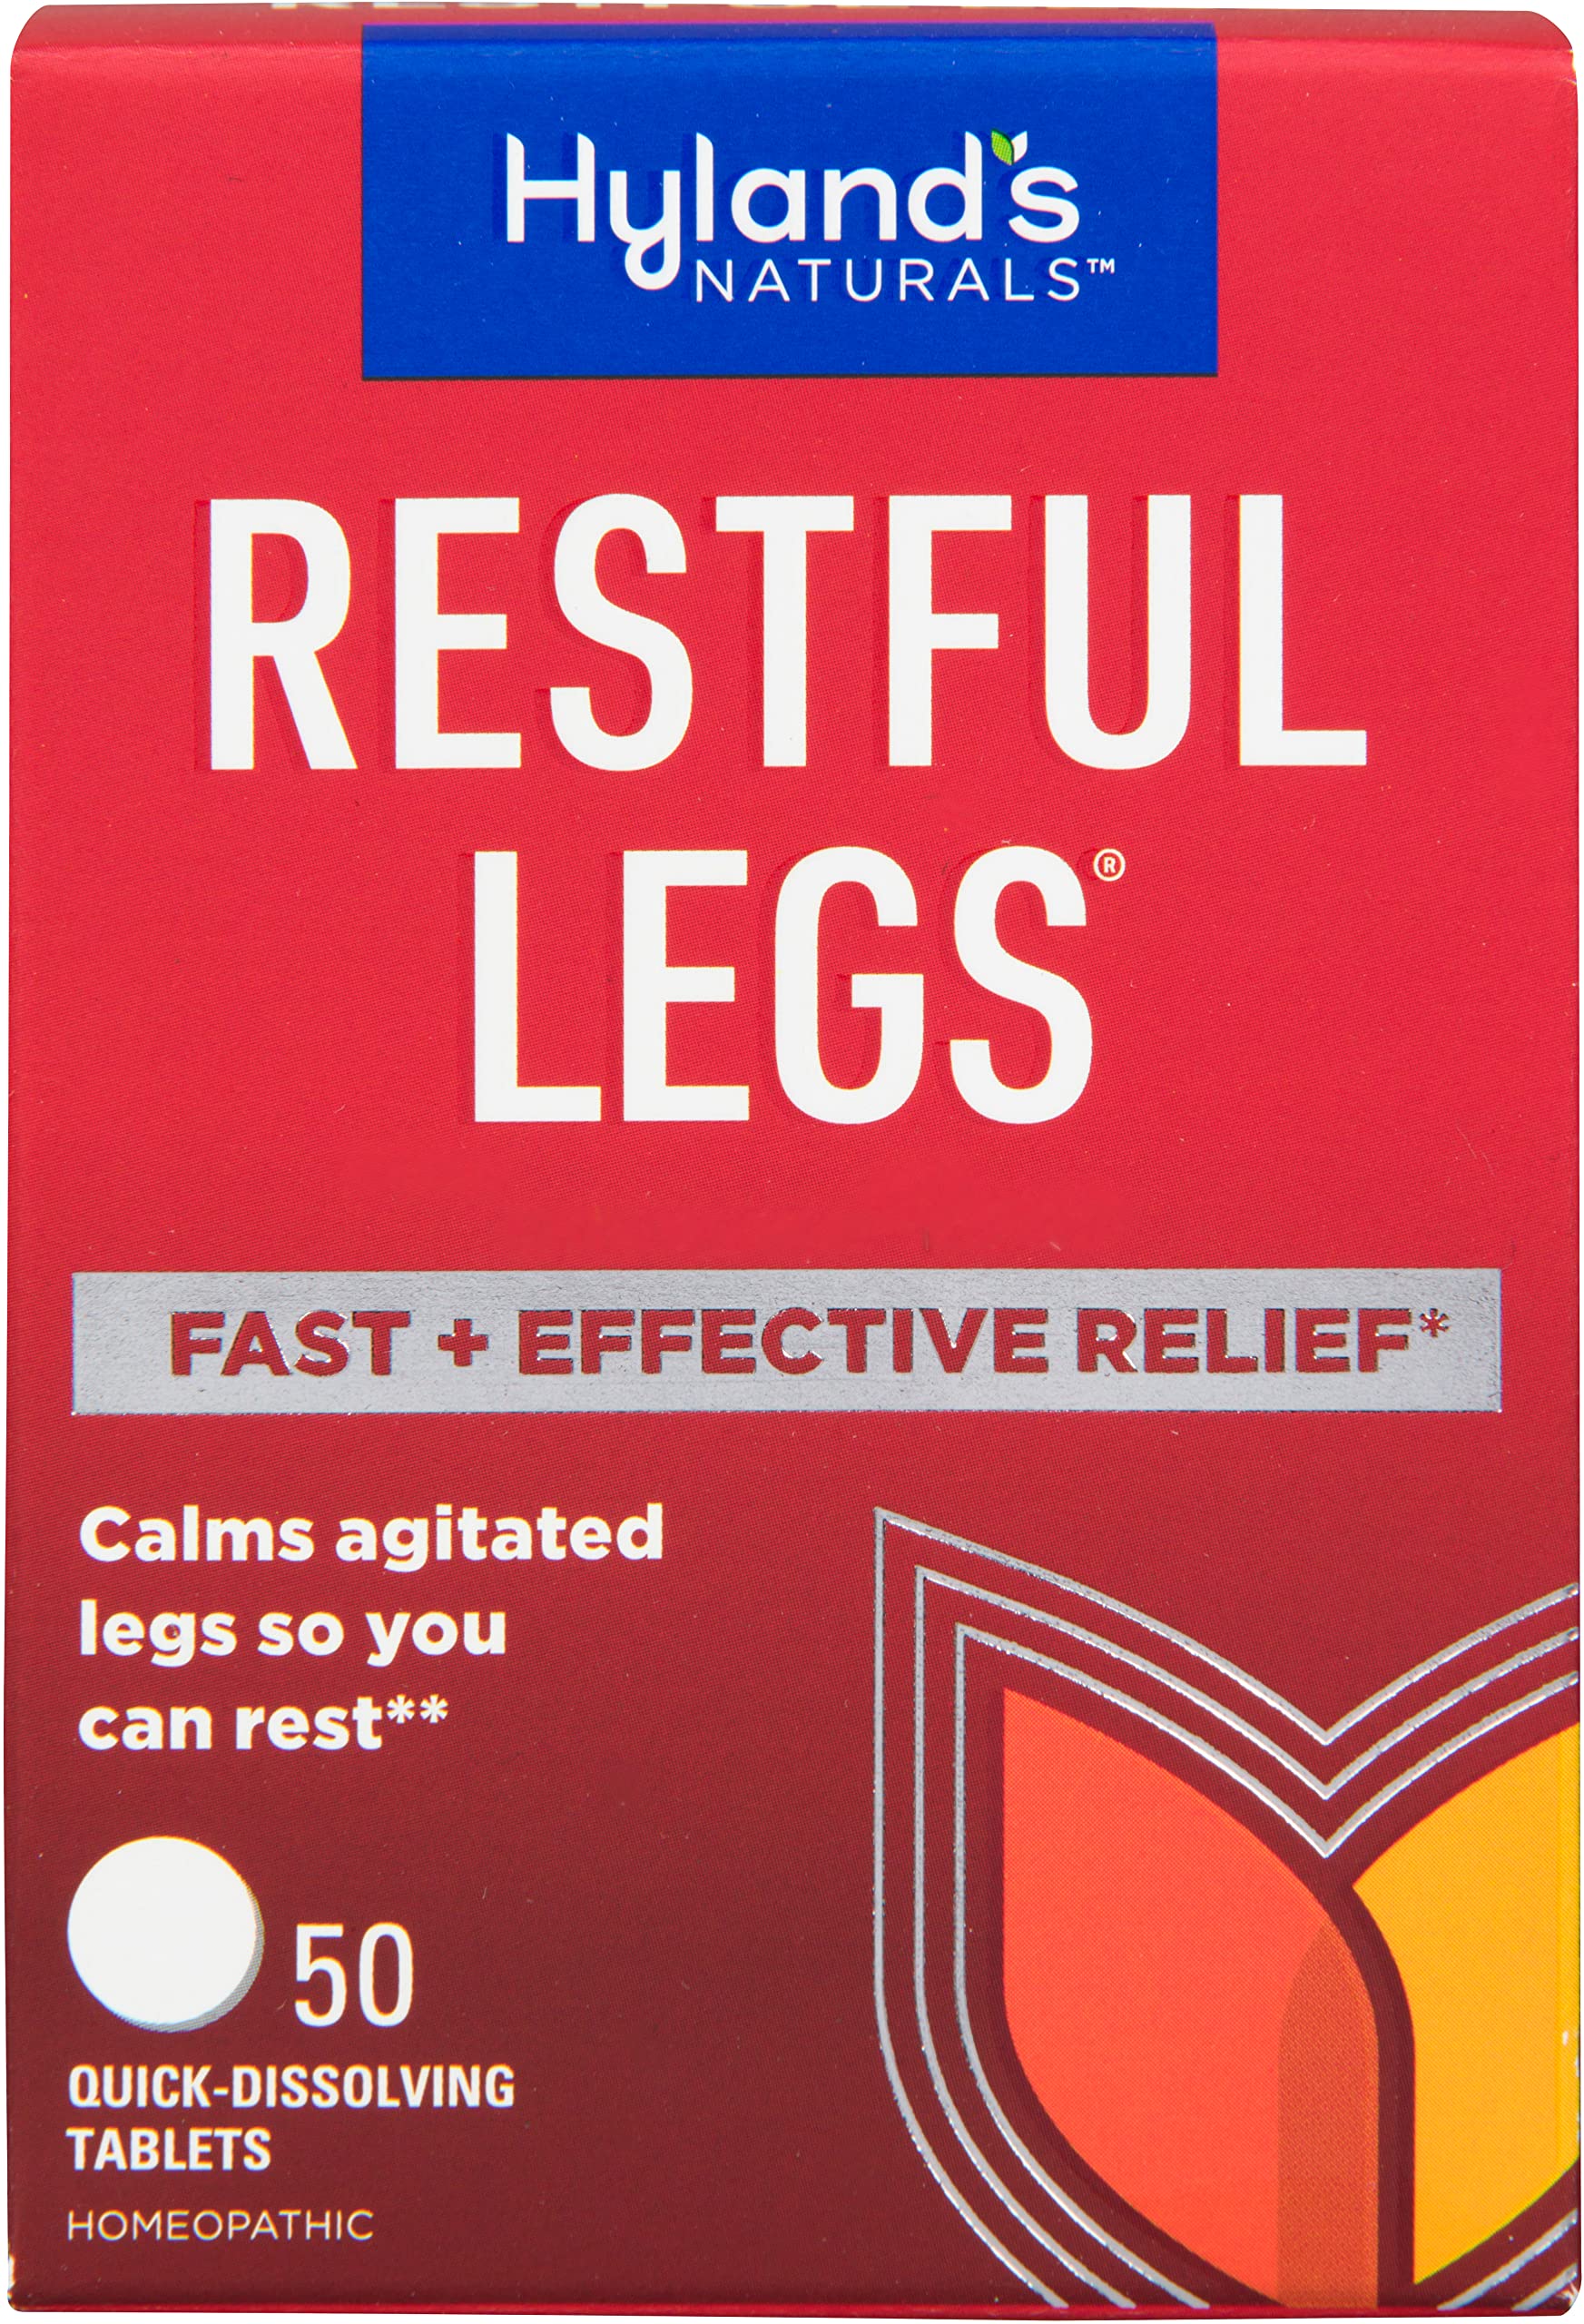 Hyland’s Naturals Restful Legs Tablets, Natural Itching, Crawling, Tingling & Leg Jerk Relief, Quick Dissolving Tablets, 50 Count